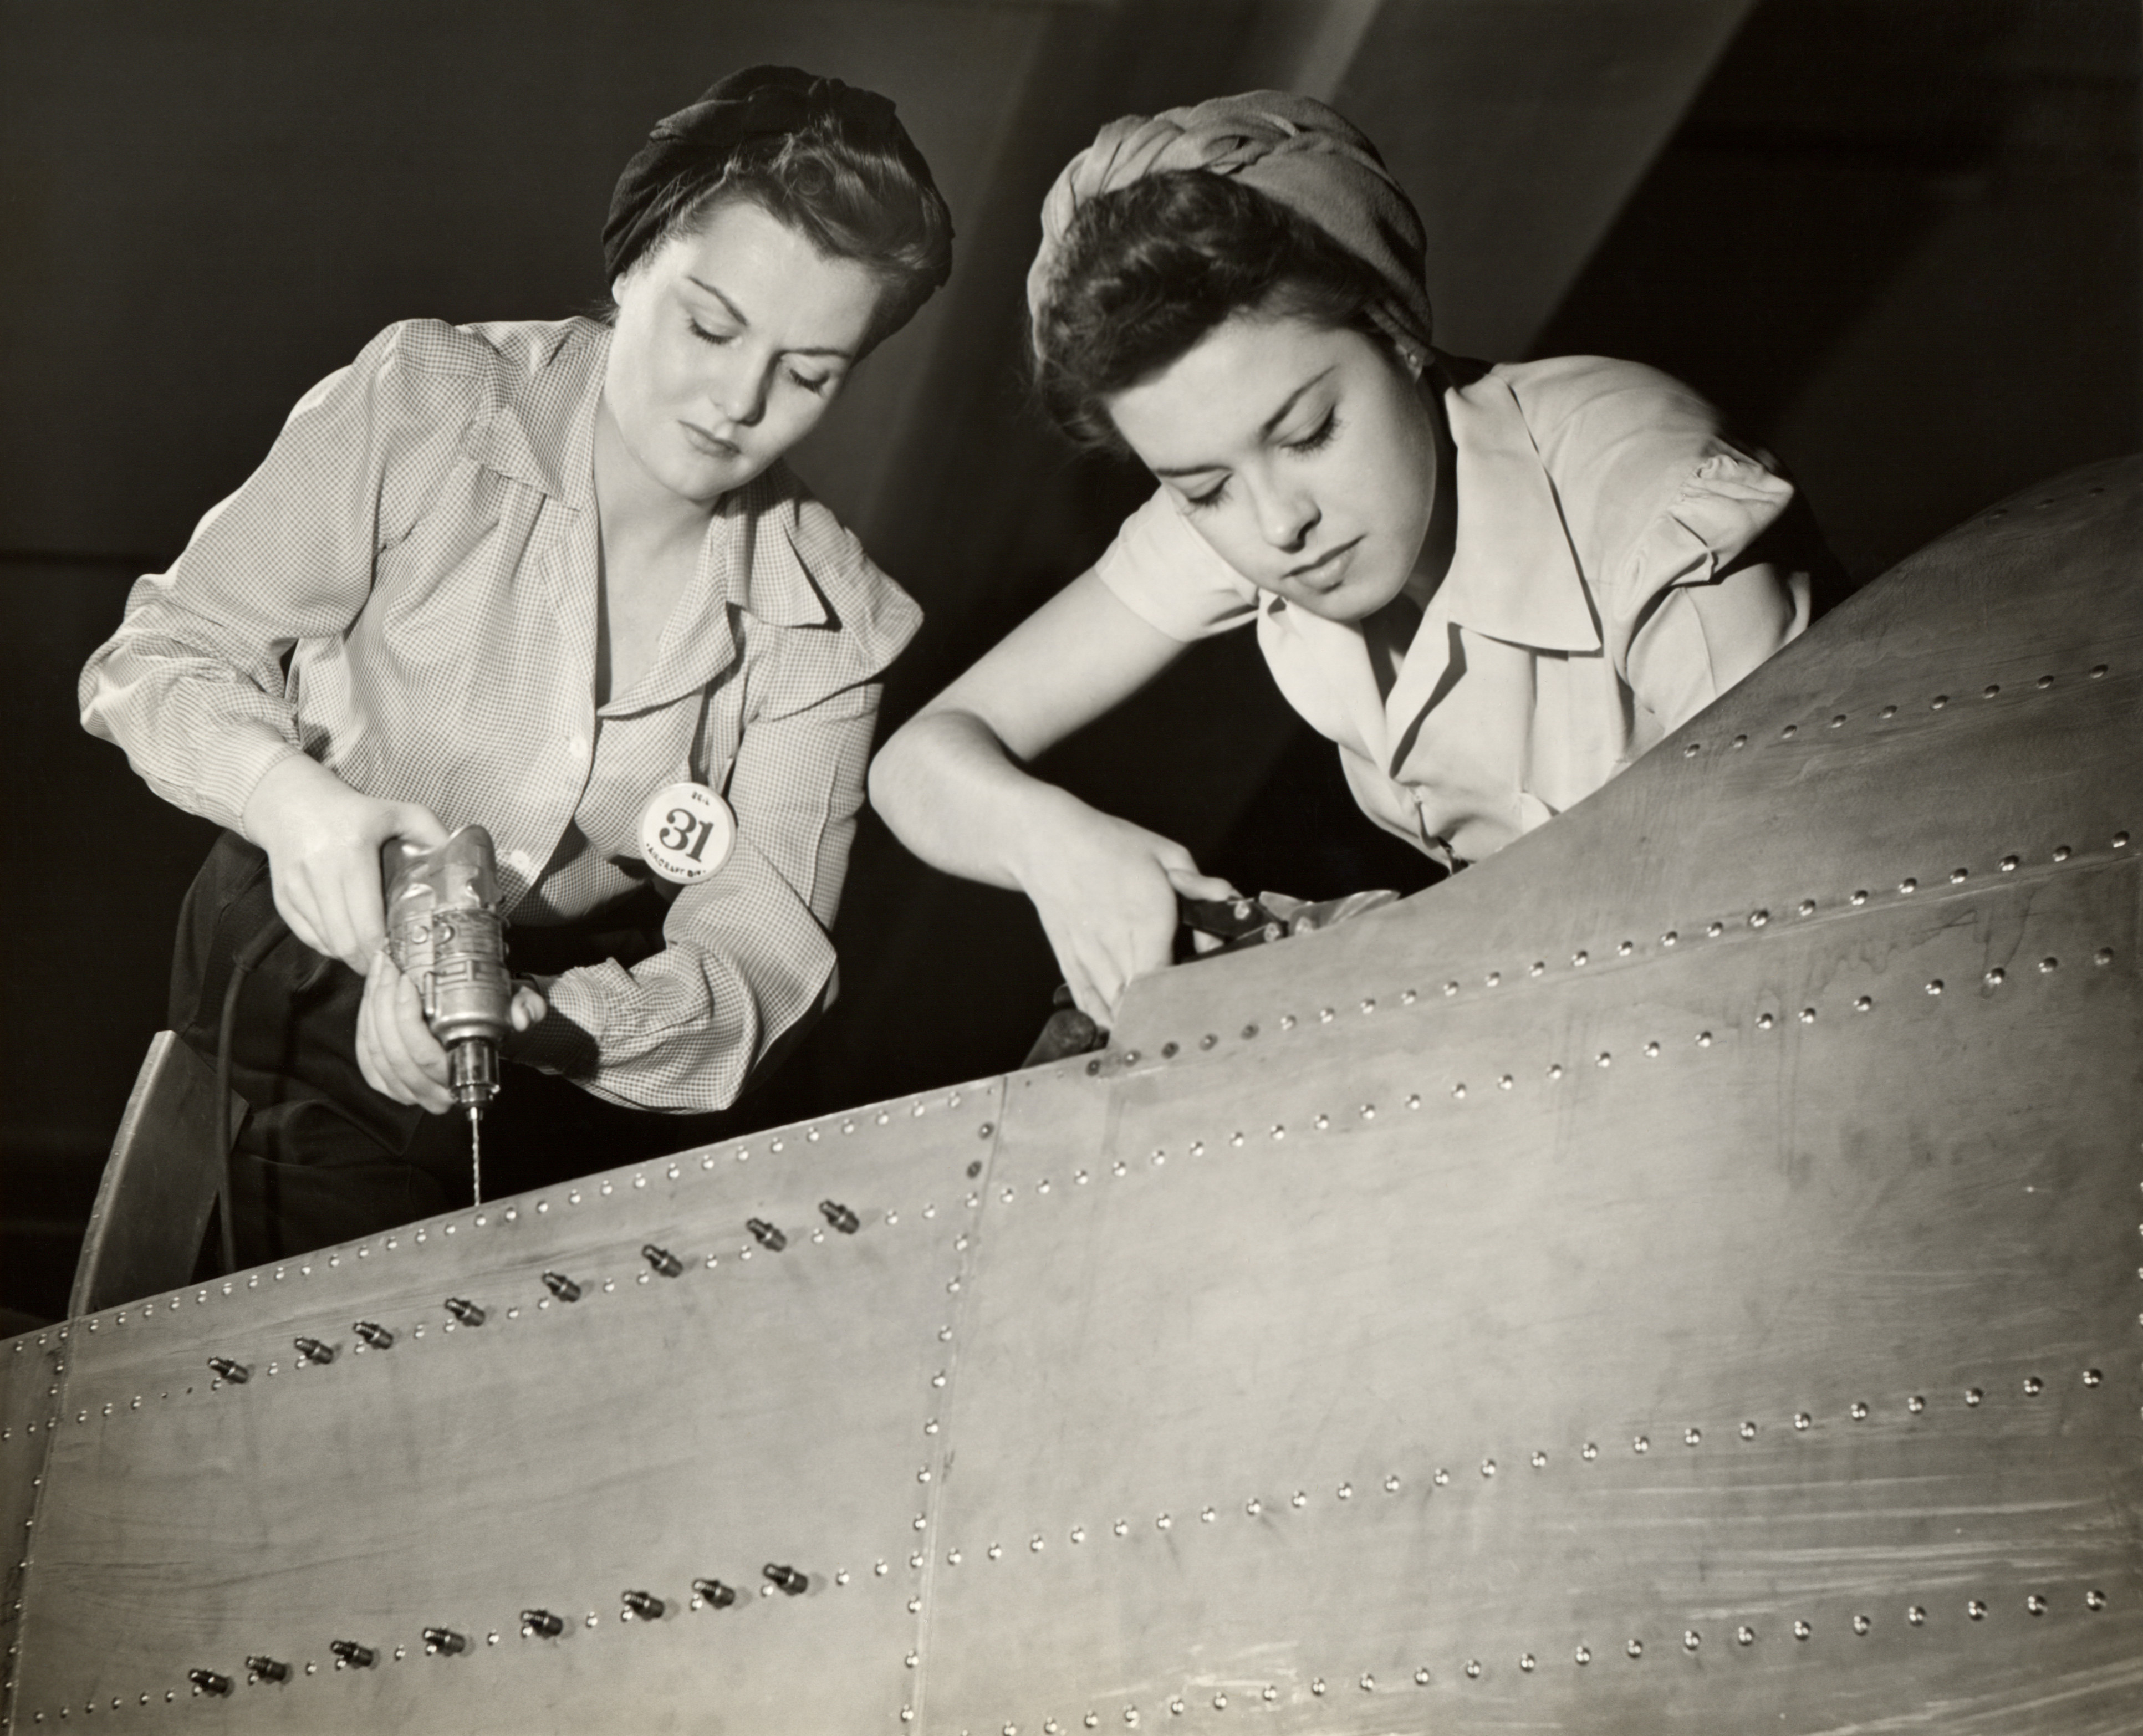 Women working on an airplane during WWII.